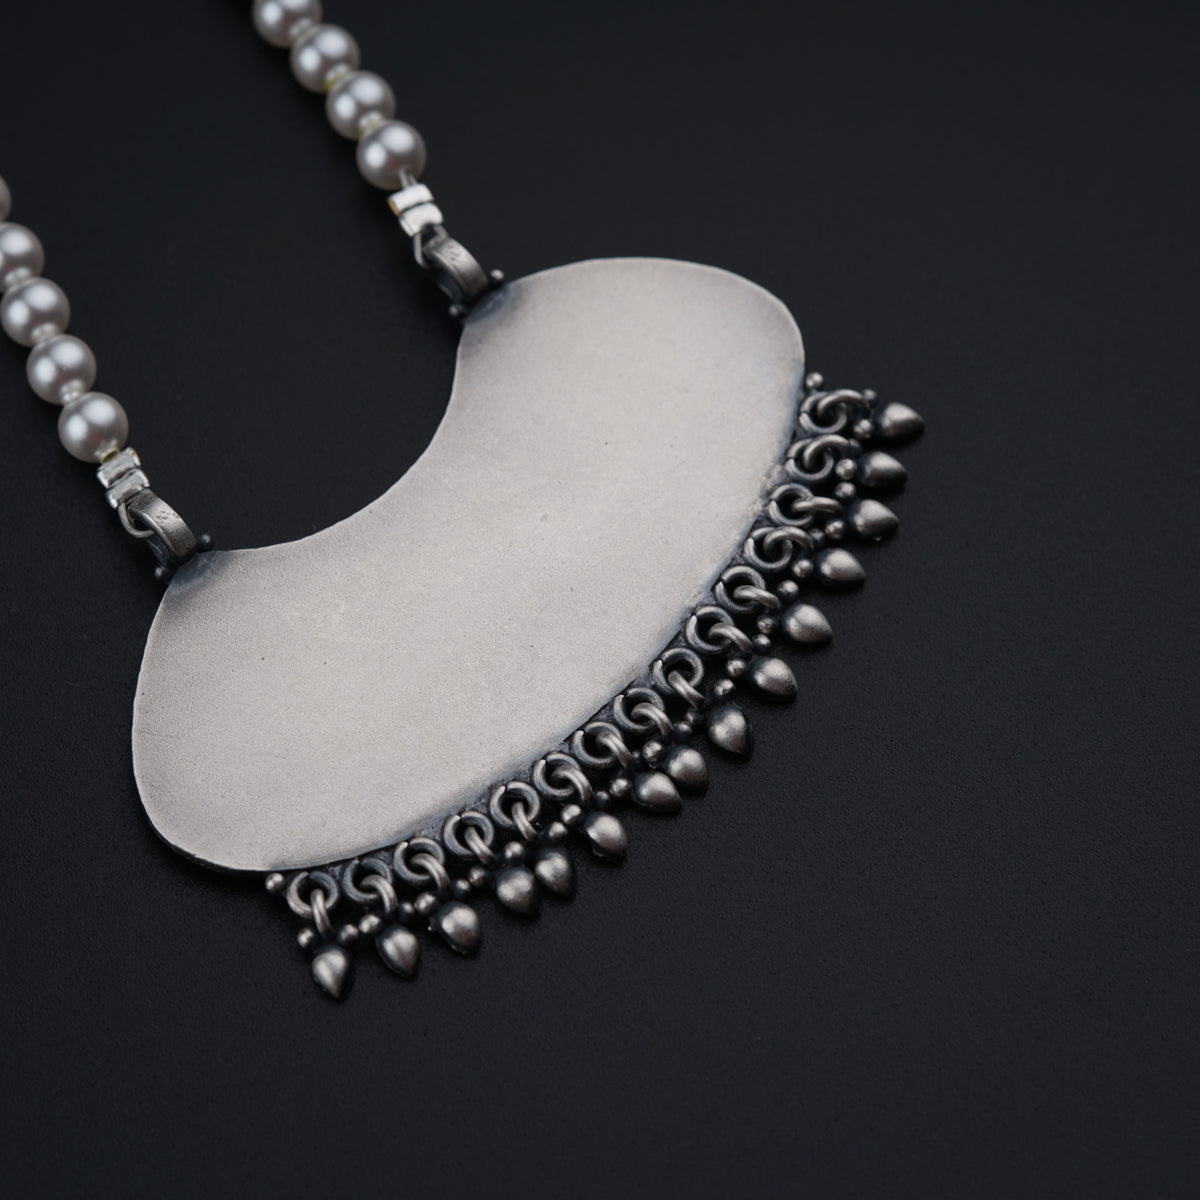 a silver necklace with pearls and beads on a black background